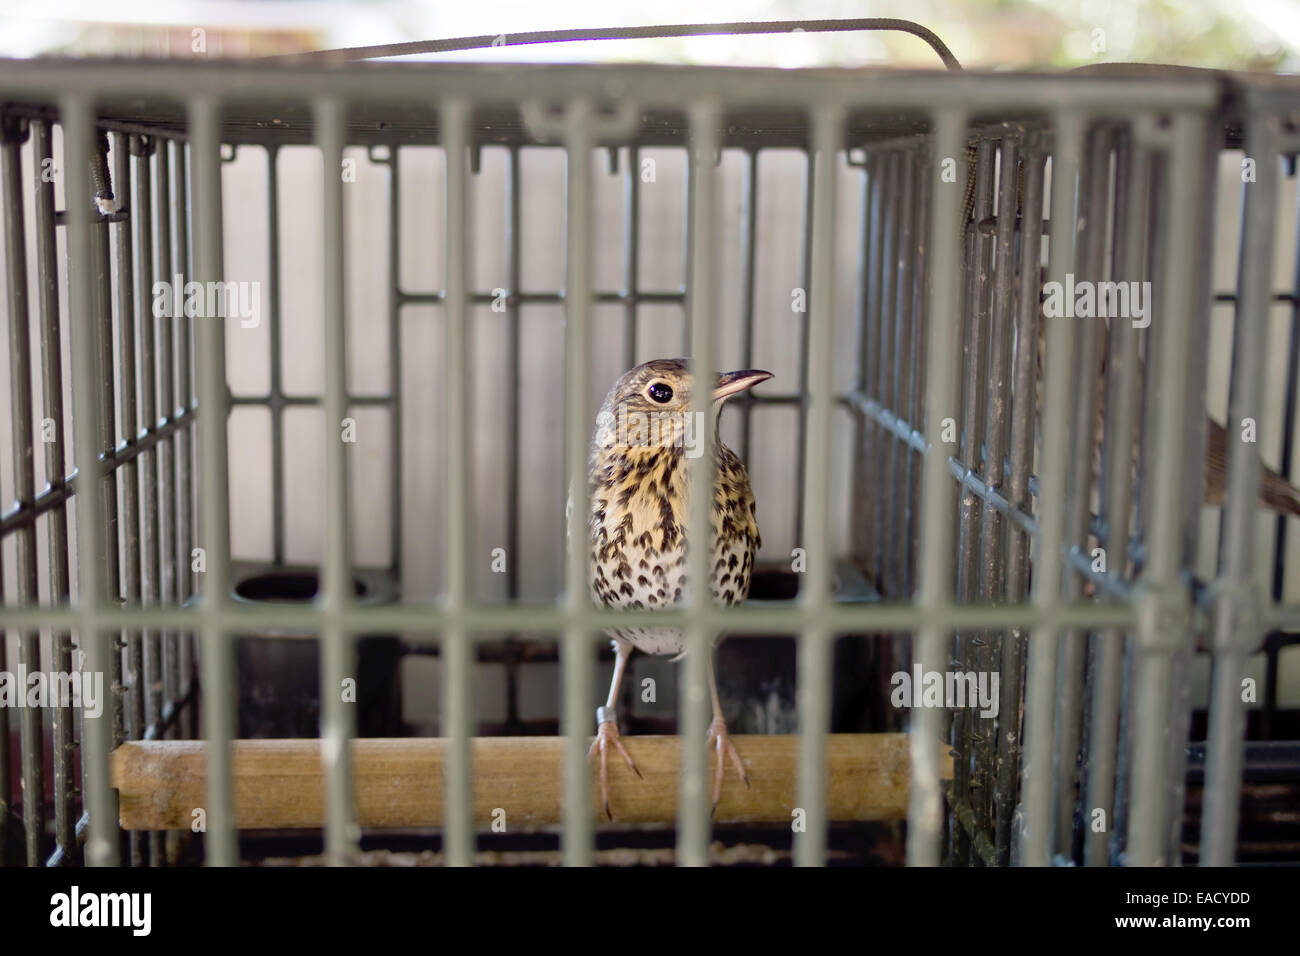 Caged Thrust - migratory birds are held for hunting, legal in Italy 2014. Stock Photo